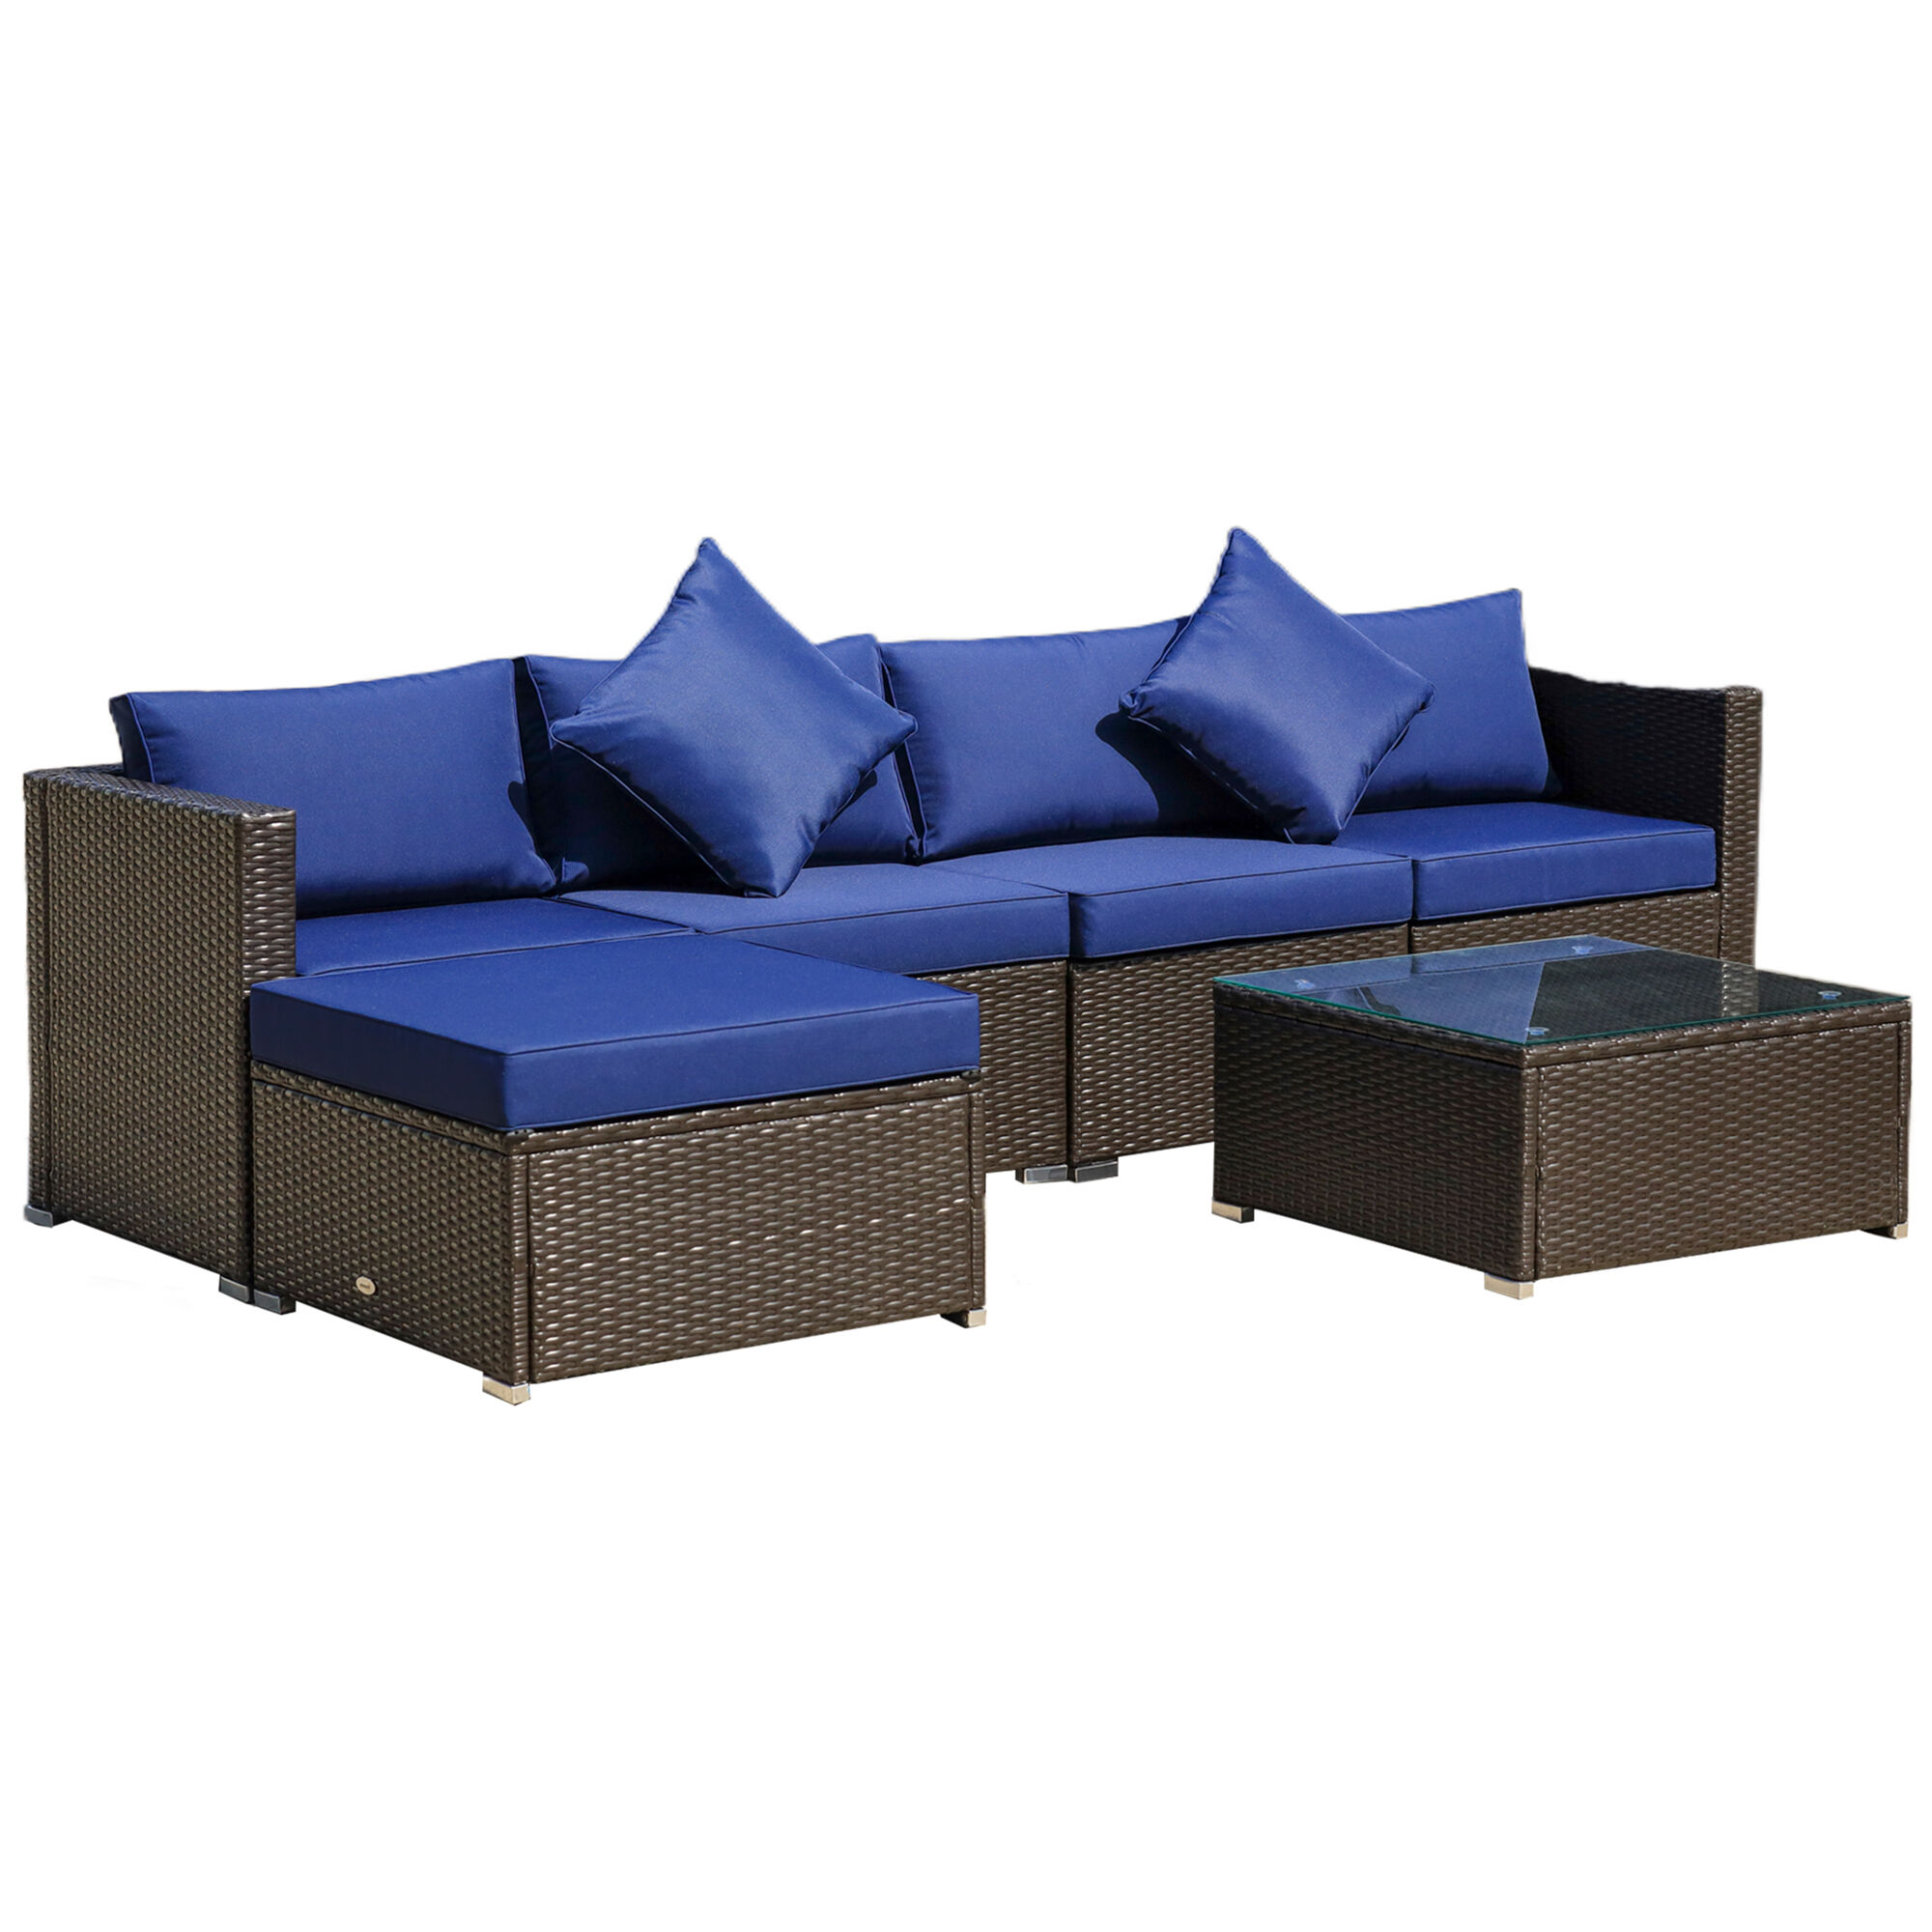 Outsunny 6PC Outdoor Rattan Sofa Set Blue Cushions Wicker Sectional Patio Furniture with Coffee Table   Aosom.com